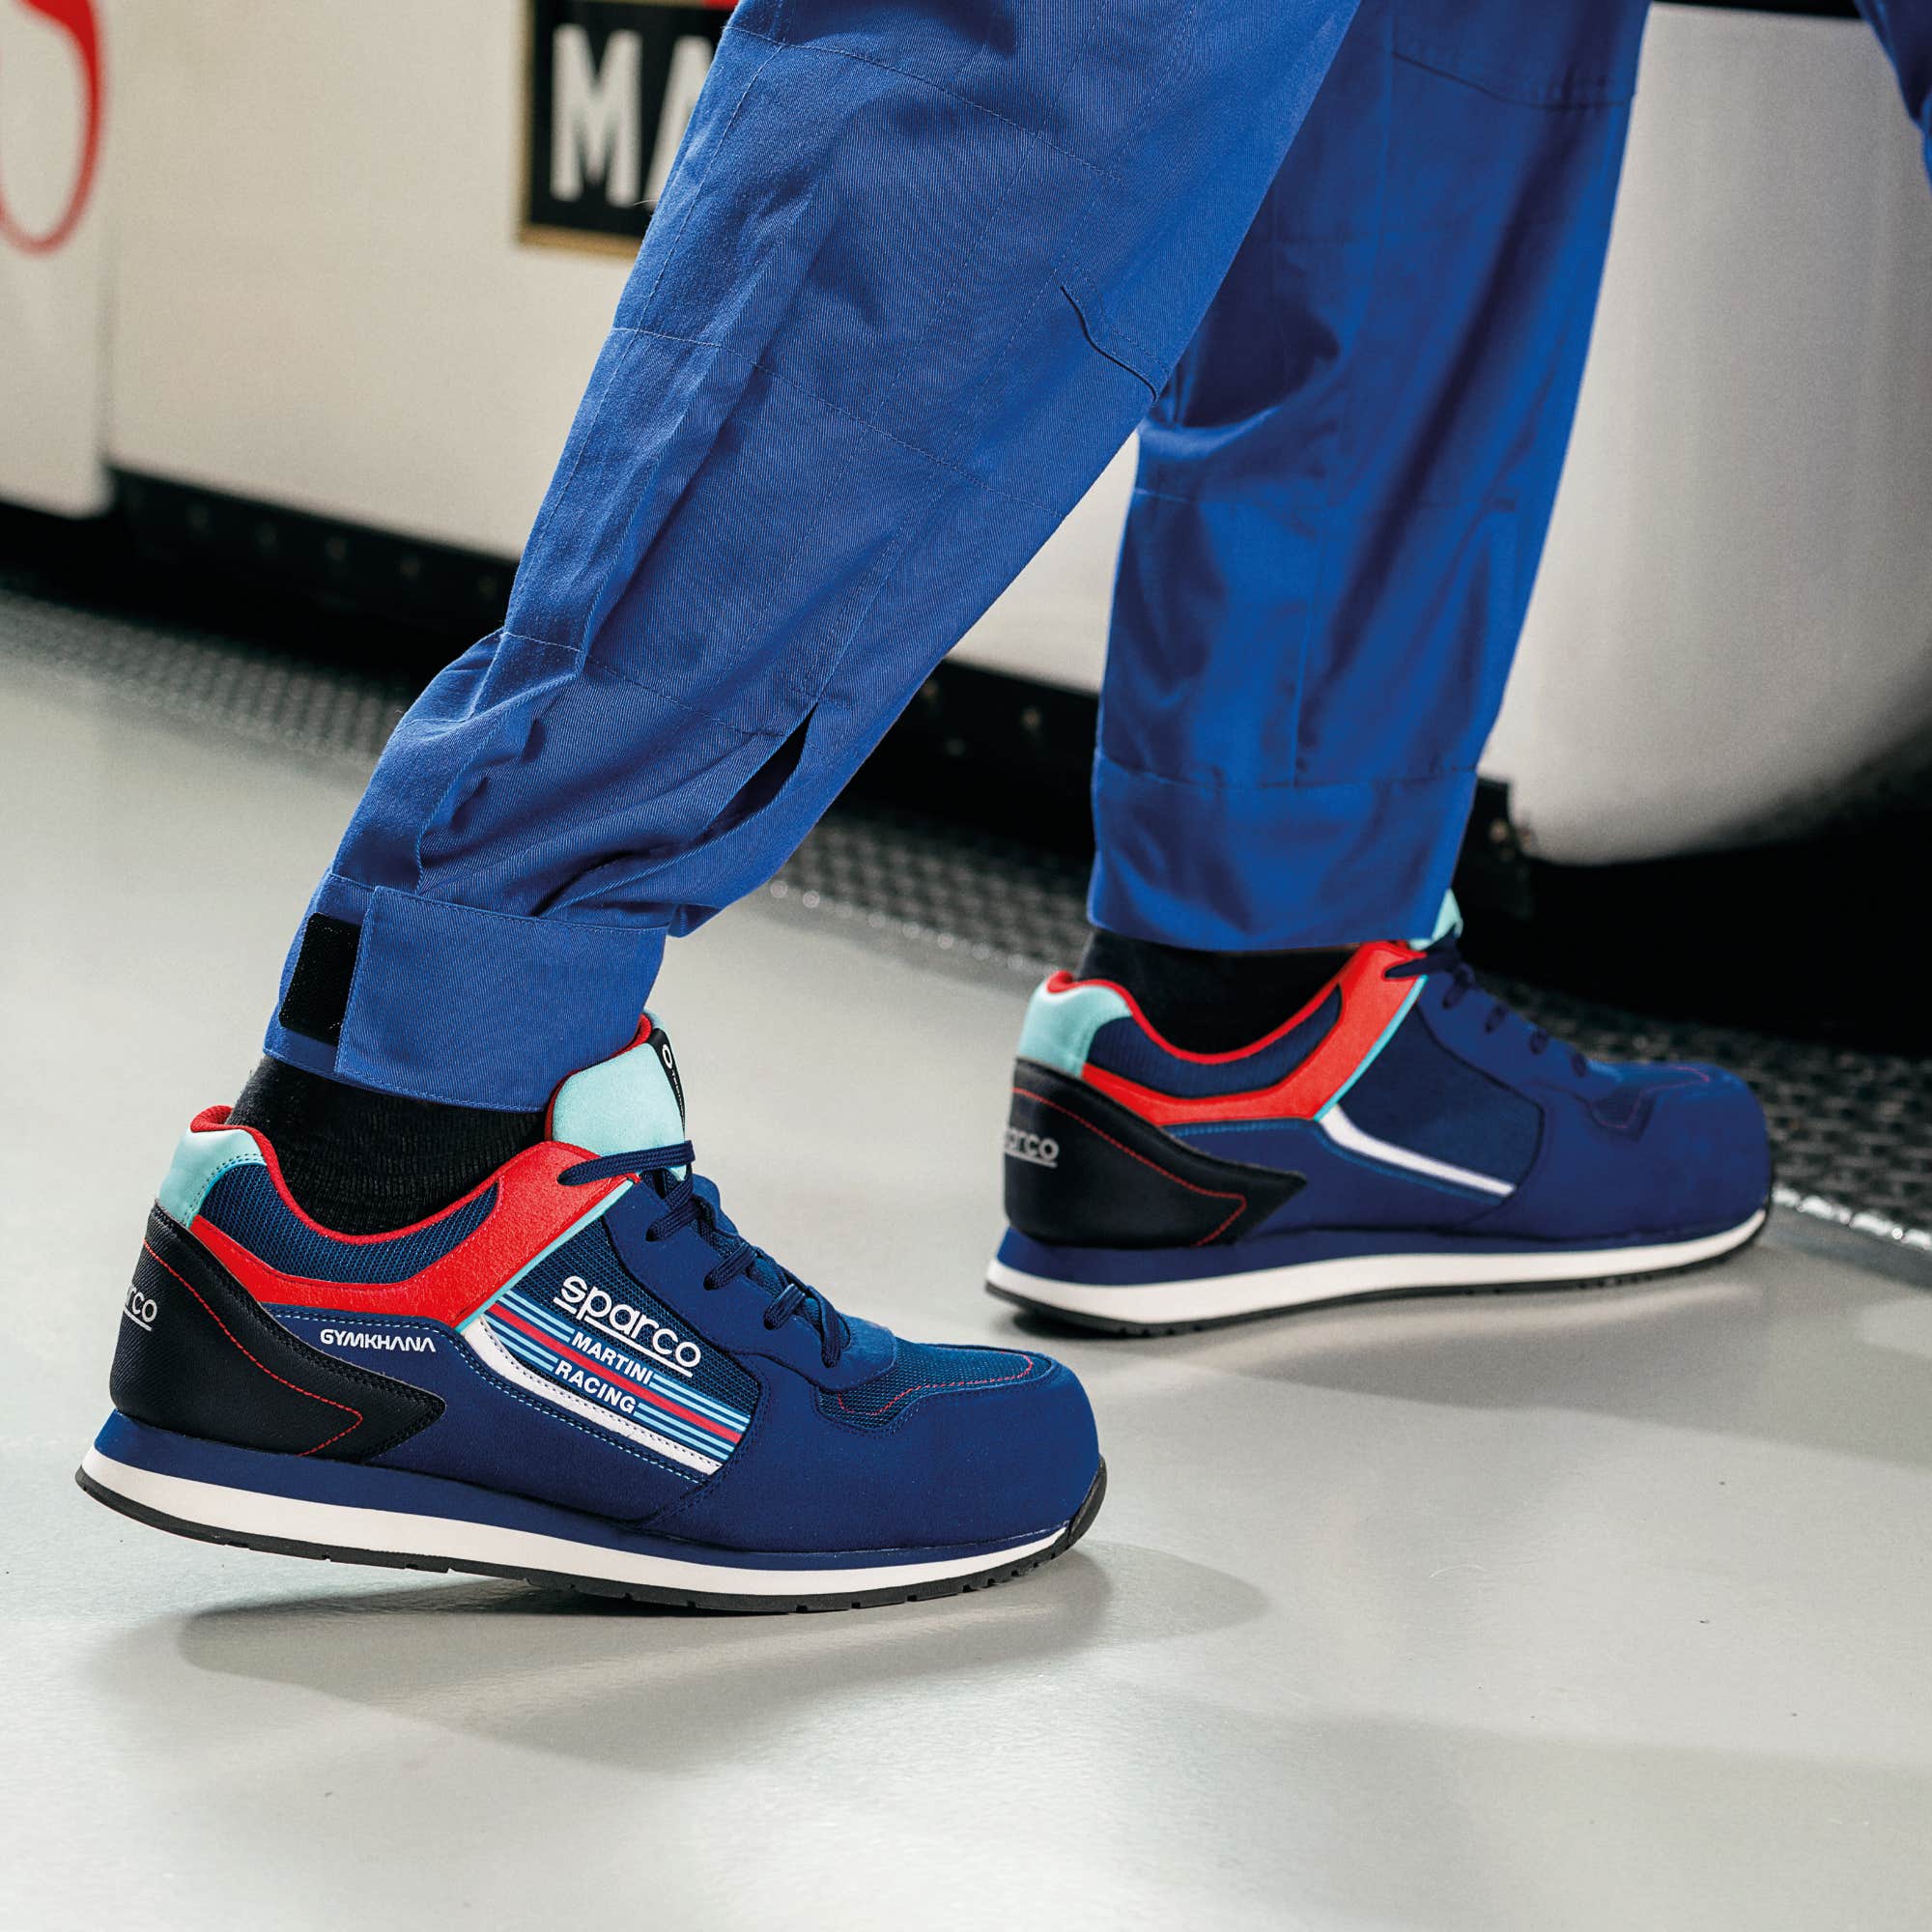 GYMKHANA S1P MARTINI RACING (SAFETY SHOES) - Sparco Shop